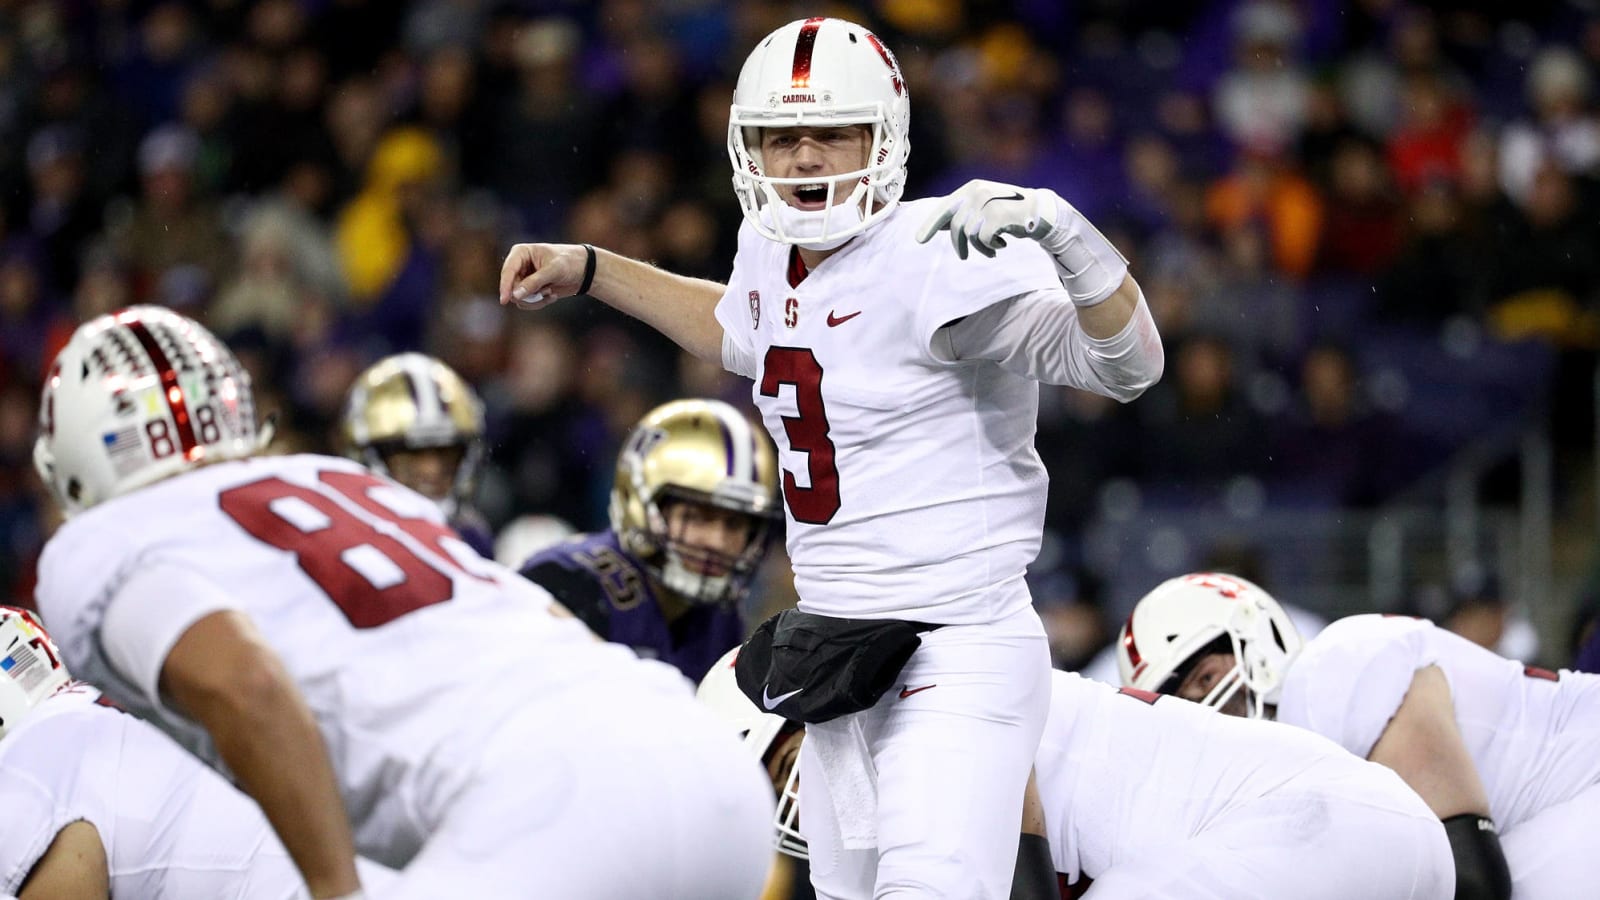 Teams that could throw a wrench in the College Football Playoff